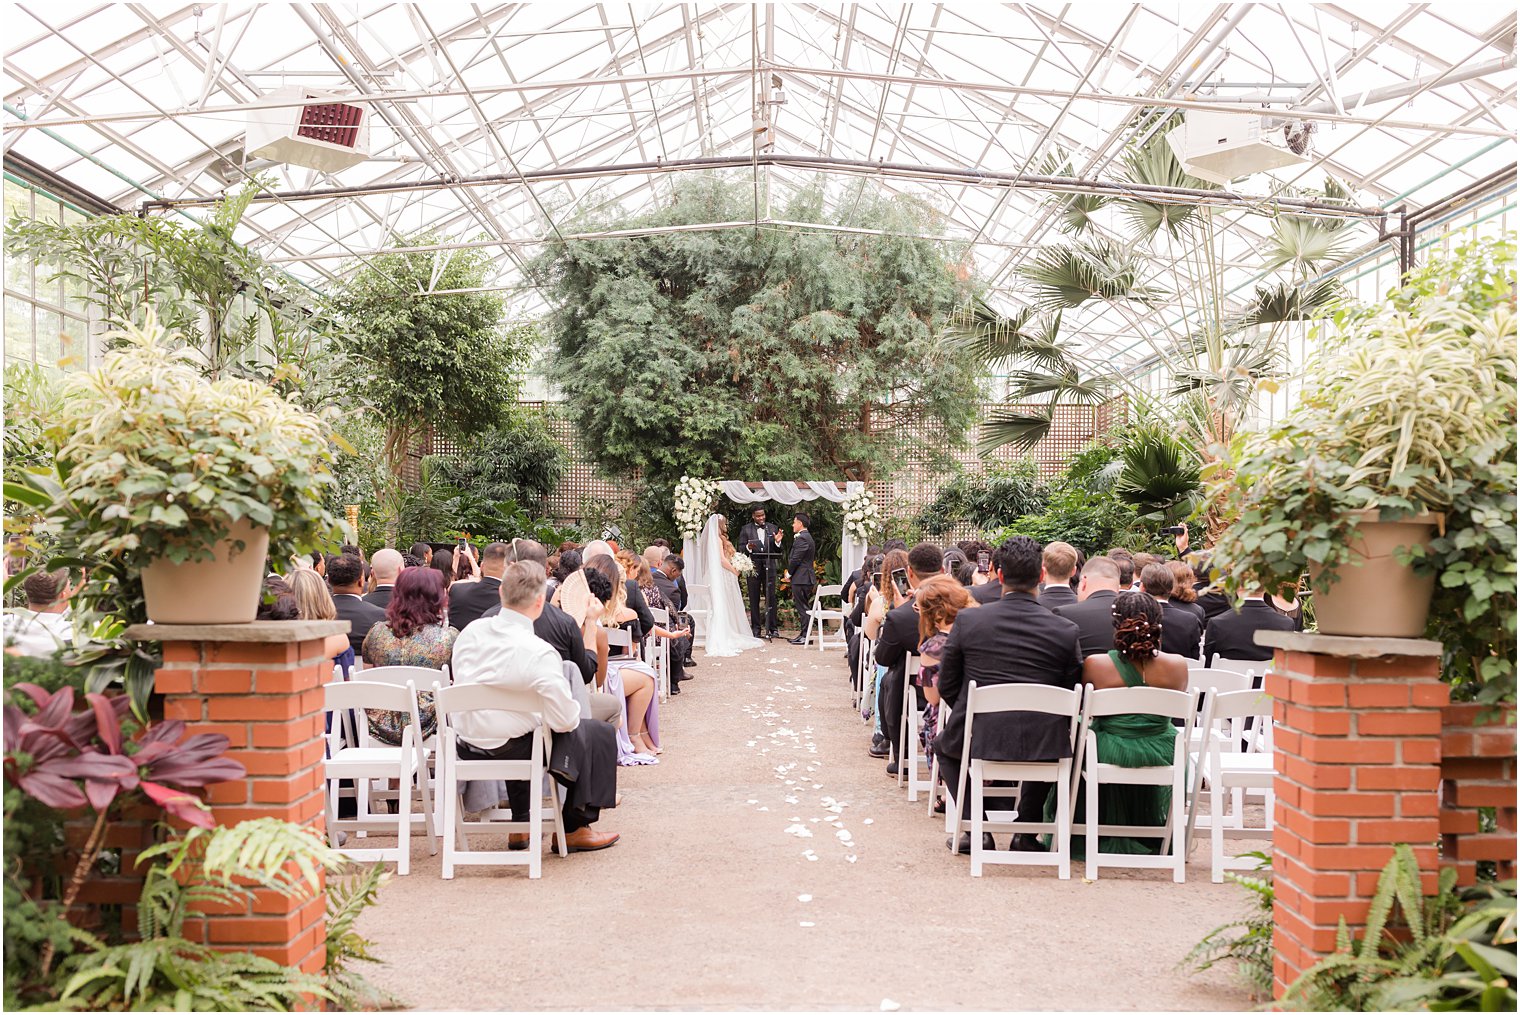 Fairmont Park Horticulture Center wedding ceremony in greenhouse